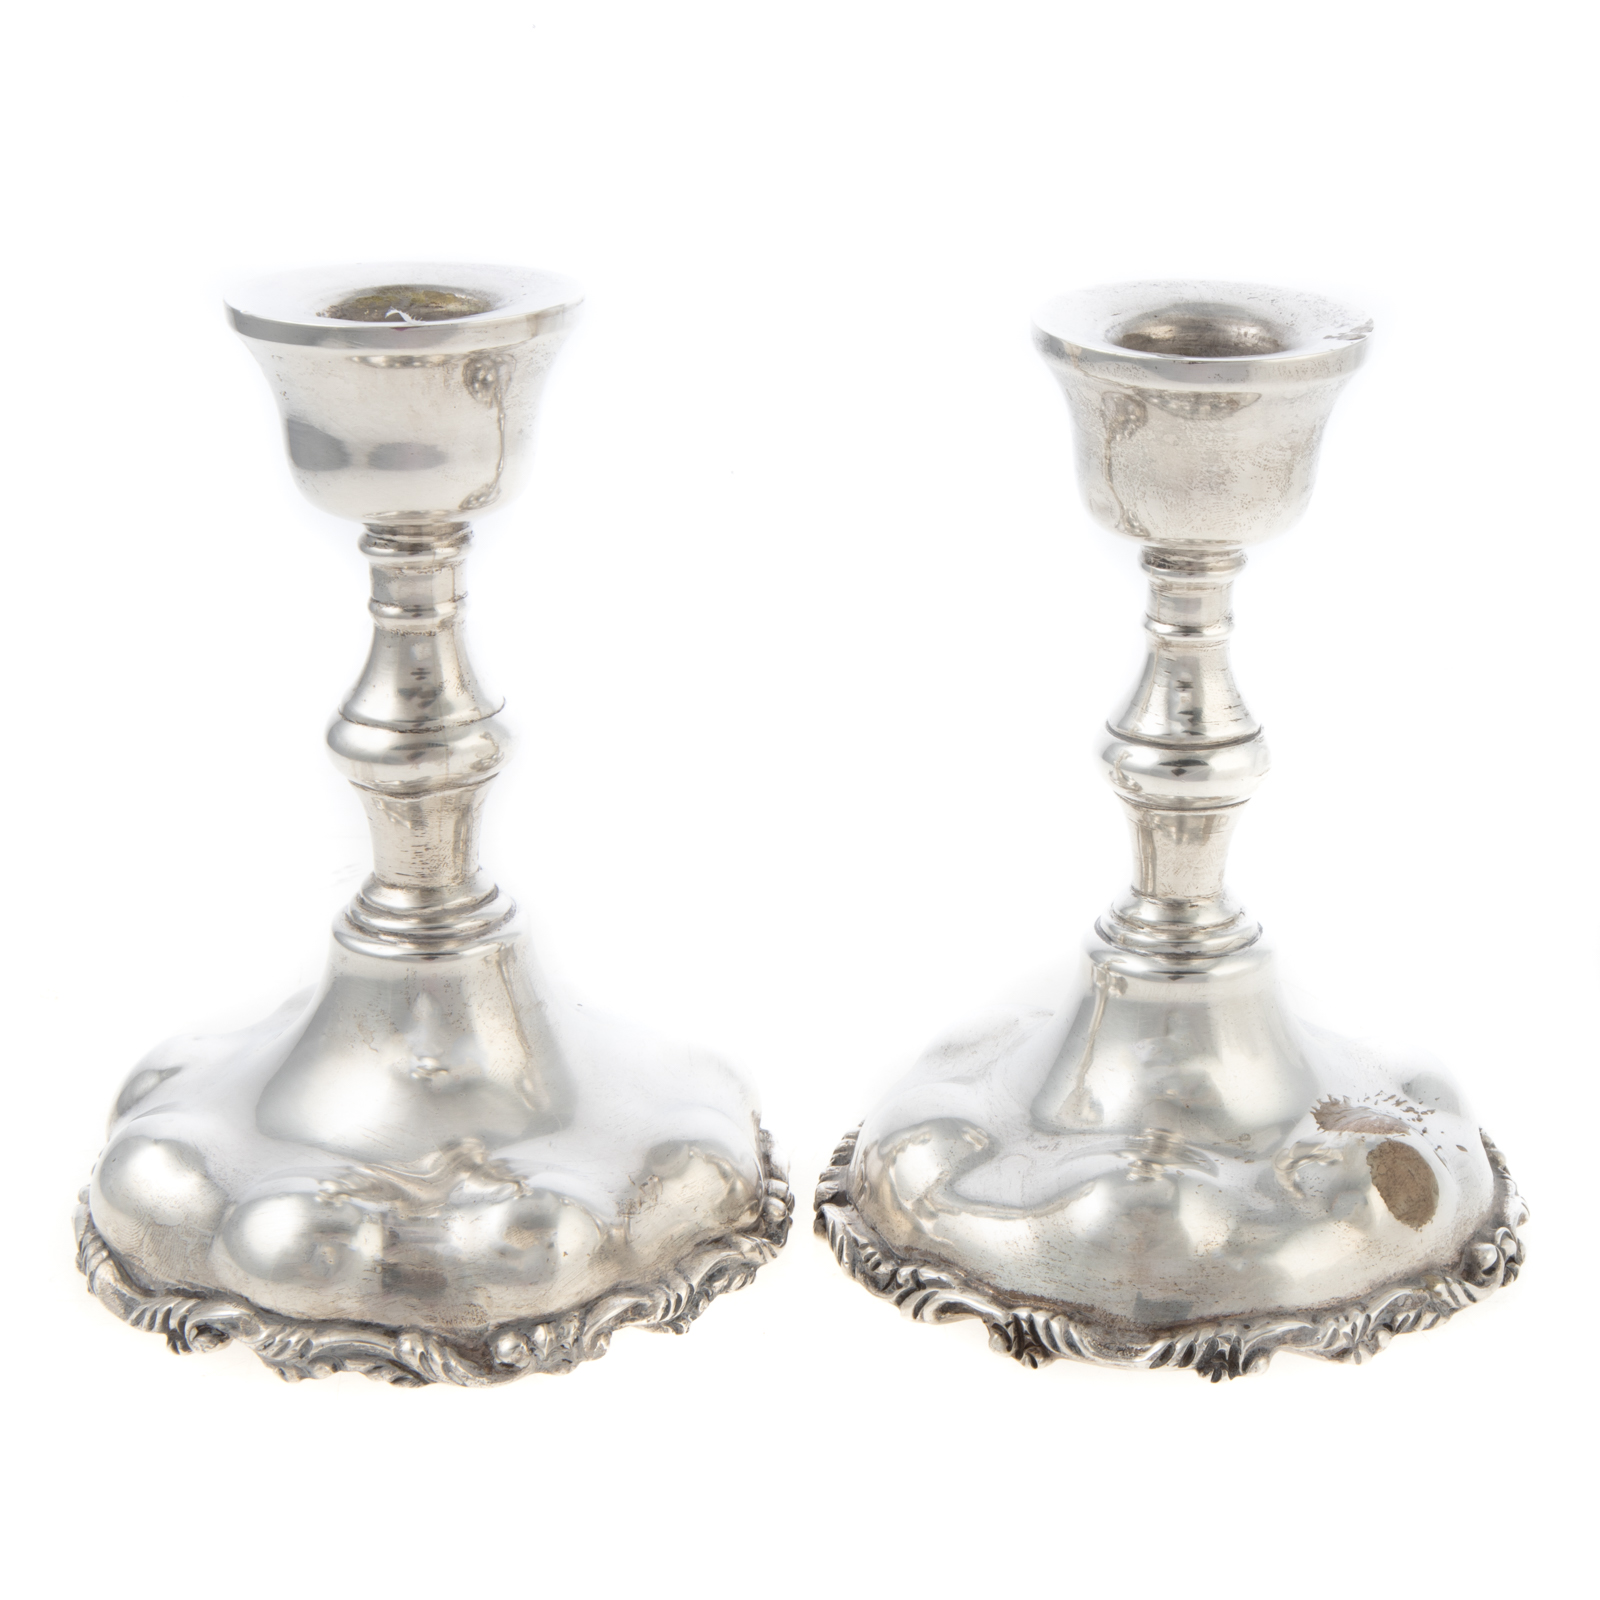 A PAIR OF MEXICAN STERLING CANDLESTICKS